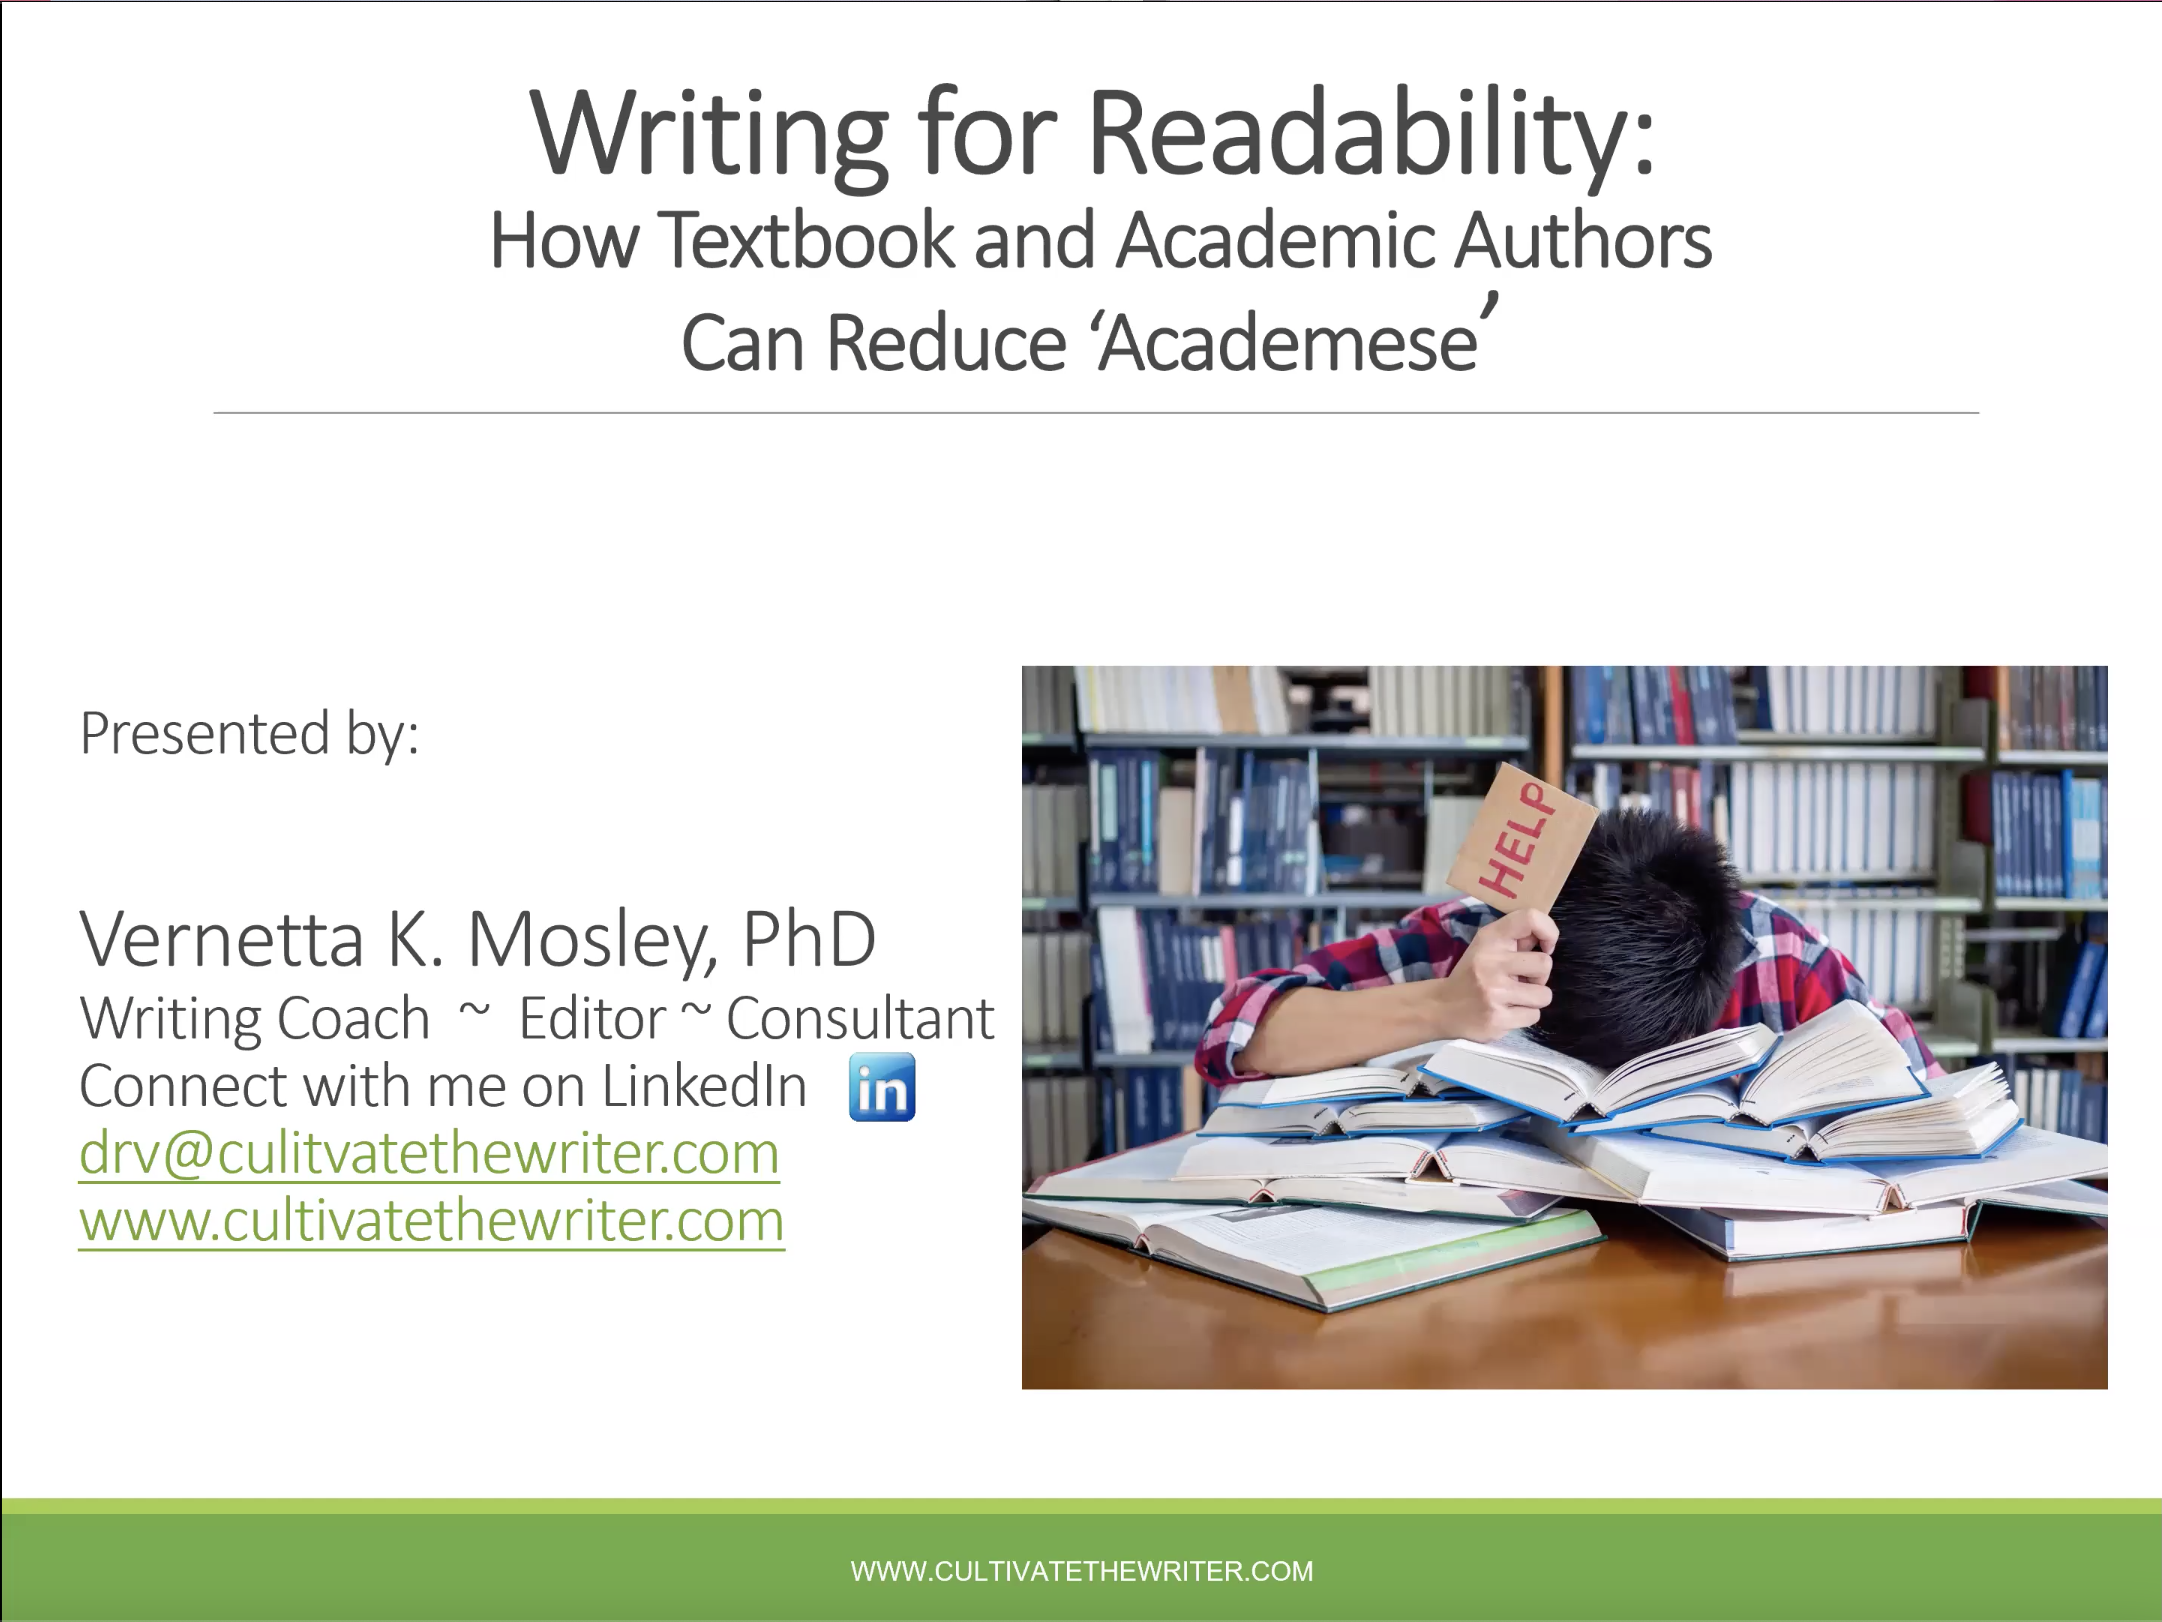 Writing for Readability Workshop